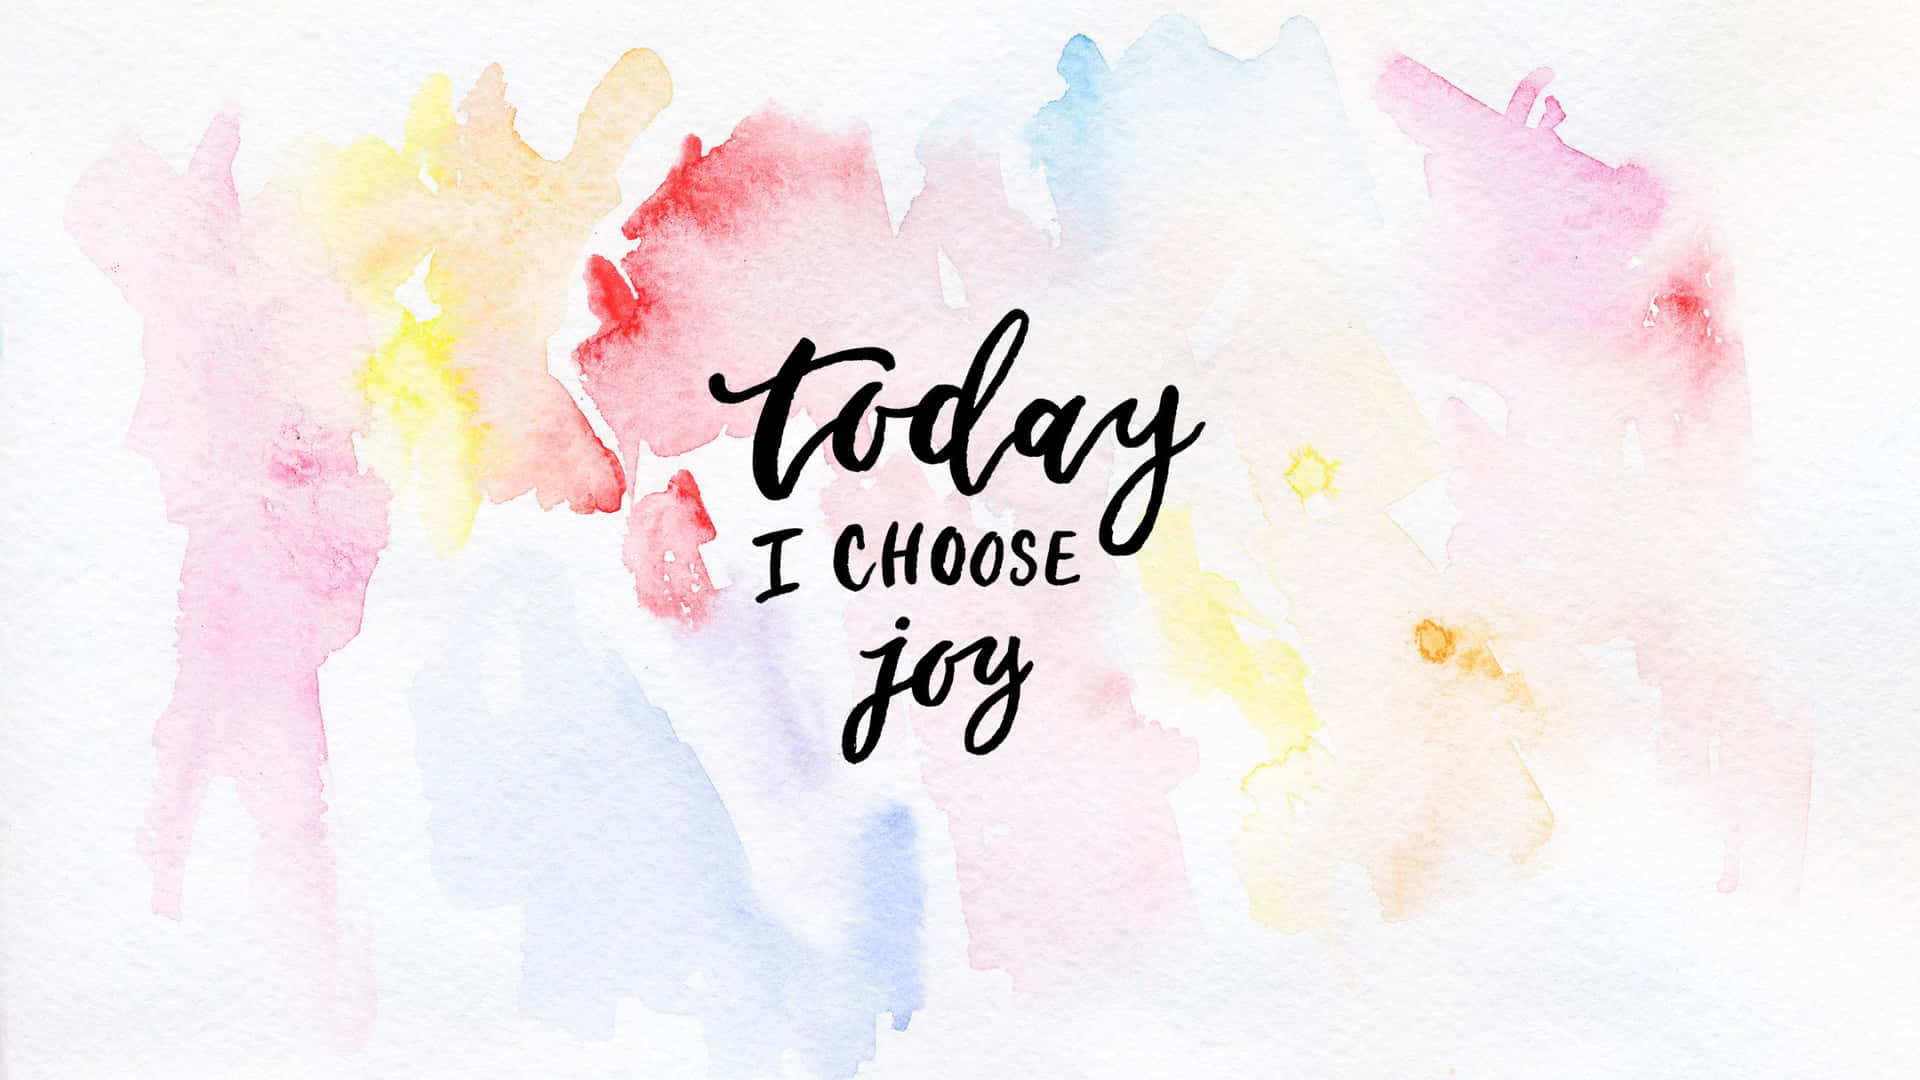 Today I choose joy, motivational quote on watercolor background. Hand lettering. Positive thinking. - Calligraphy